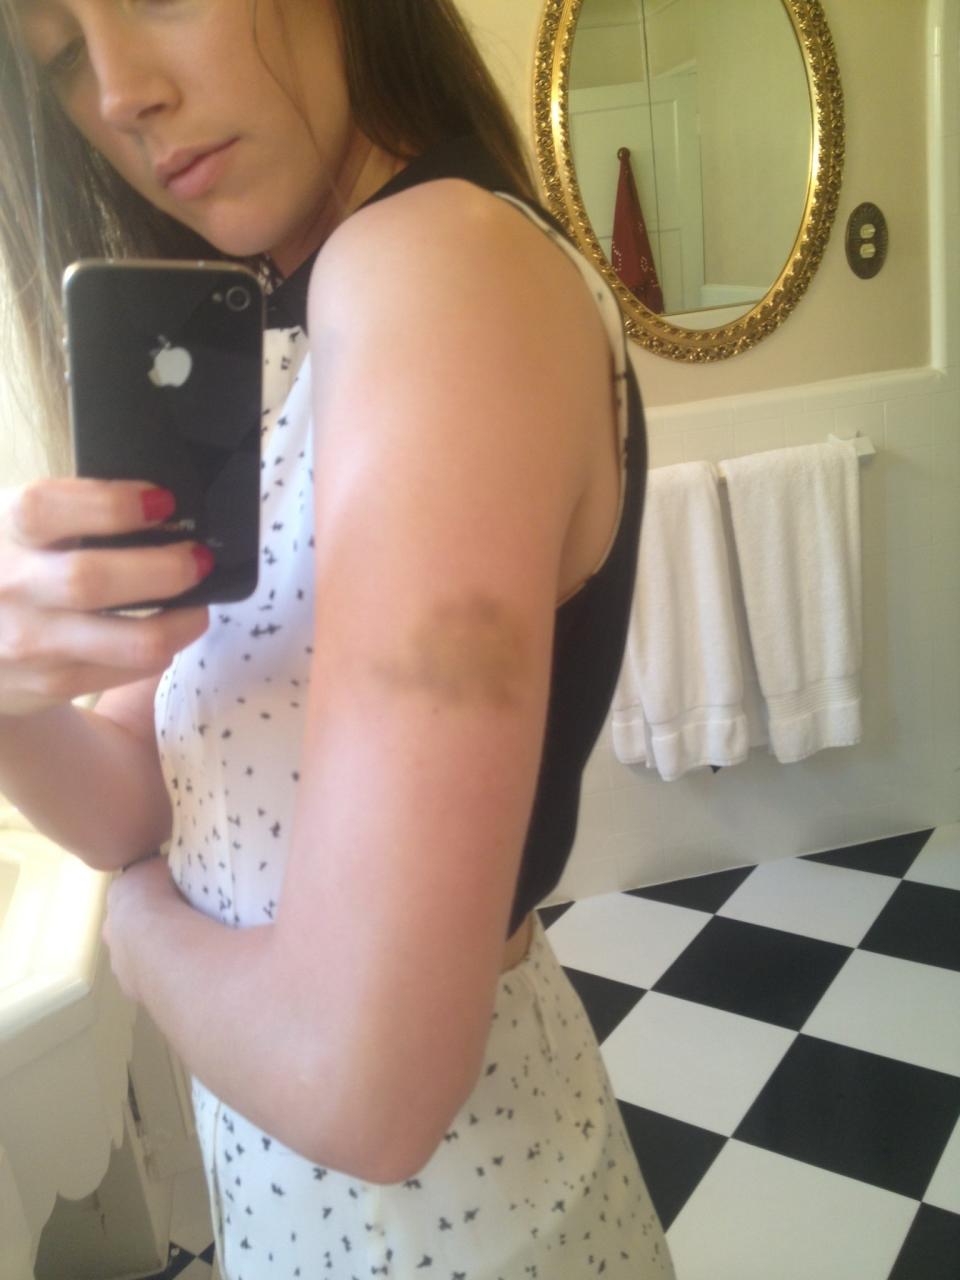 A photo shown in court of a bruise on Amber Heard's arm.